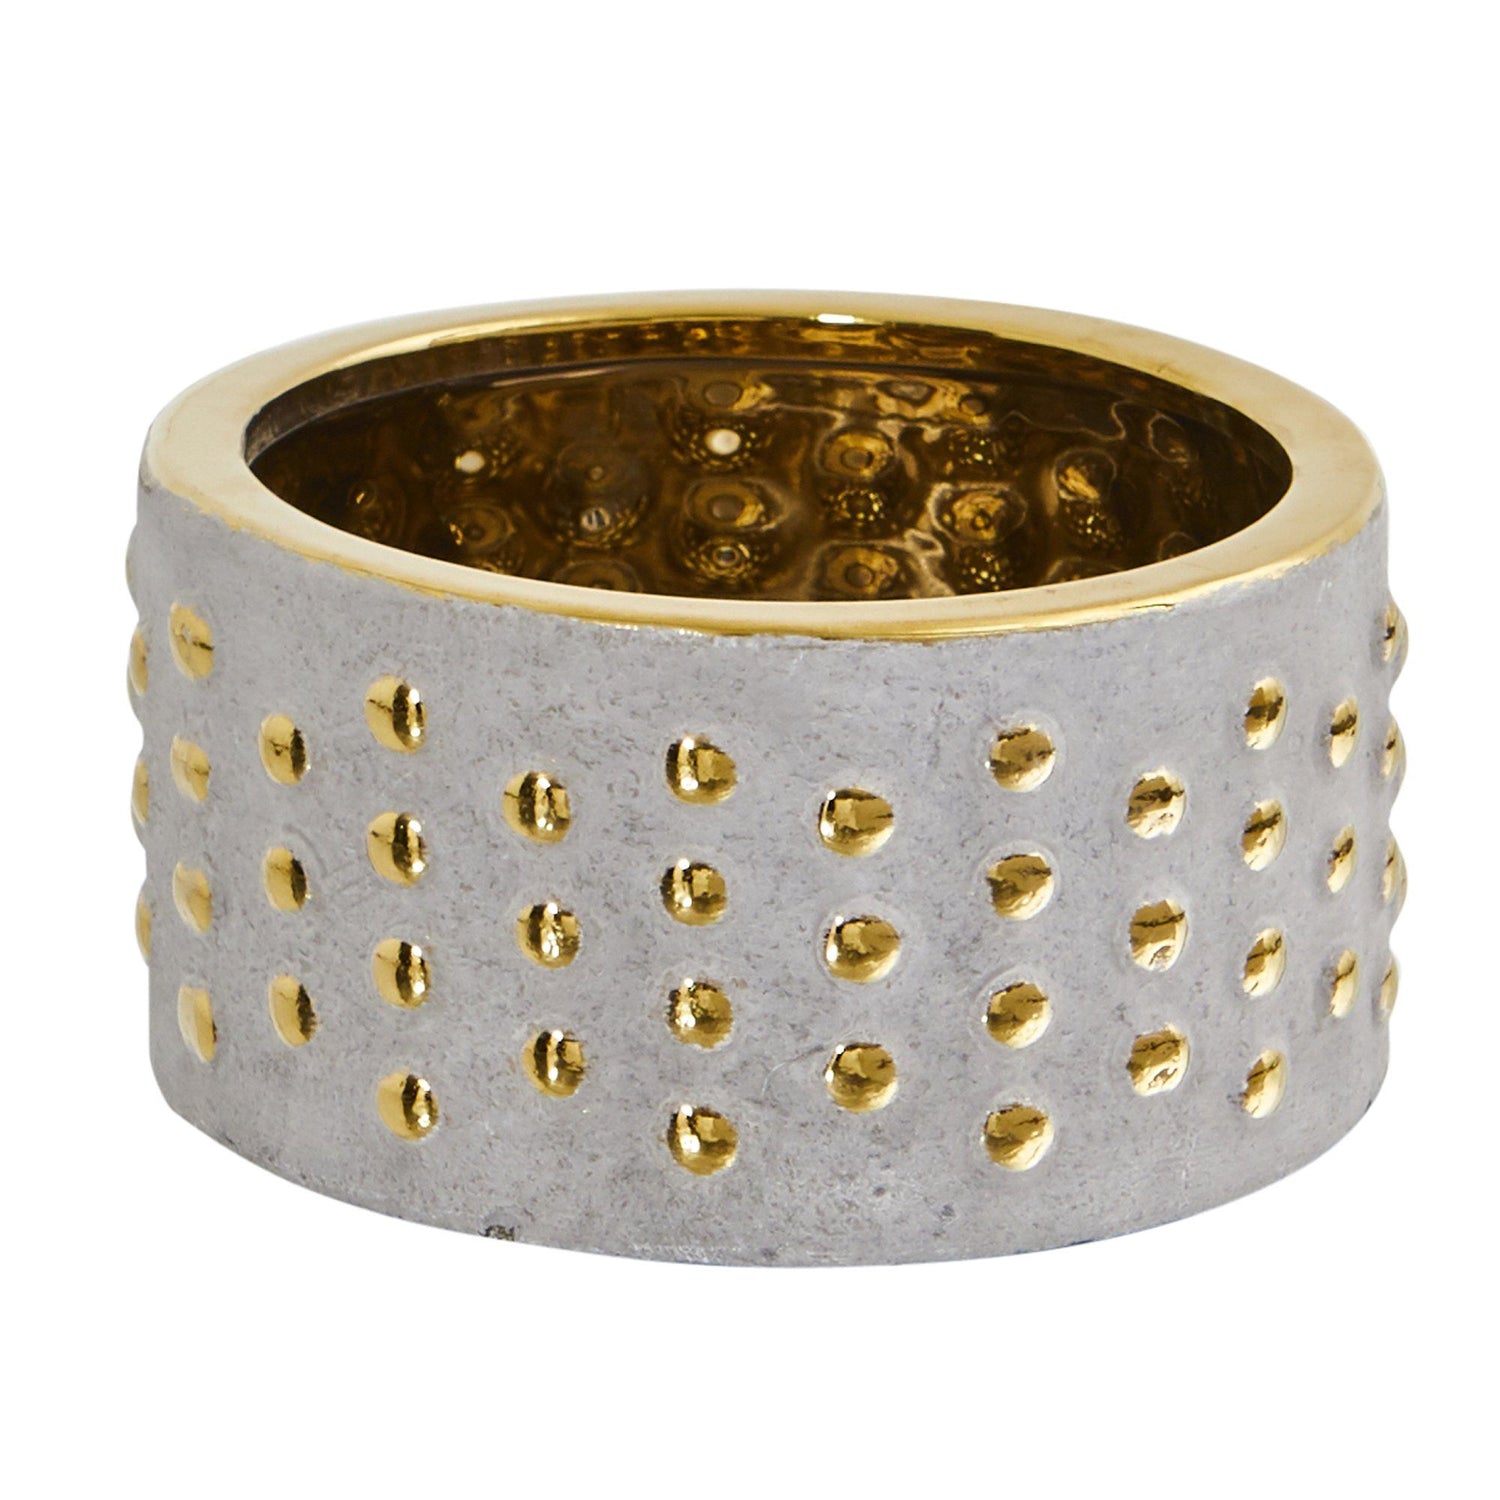 6.75” Regal Stone Hobnail Planter with Gold Accents